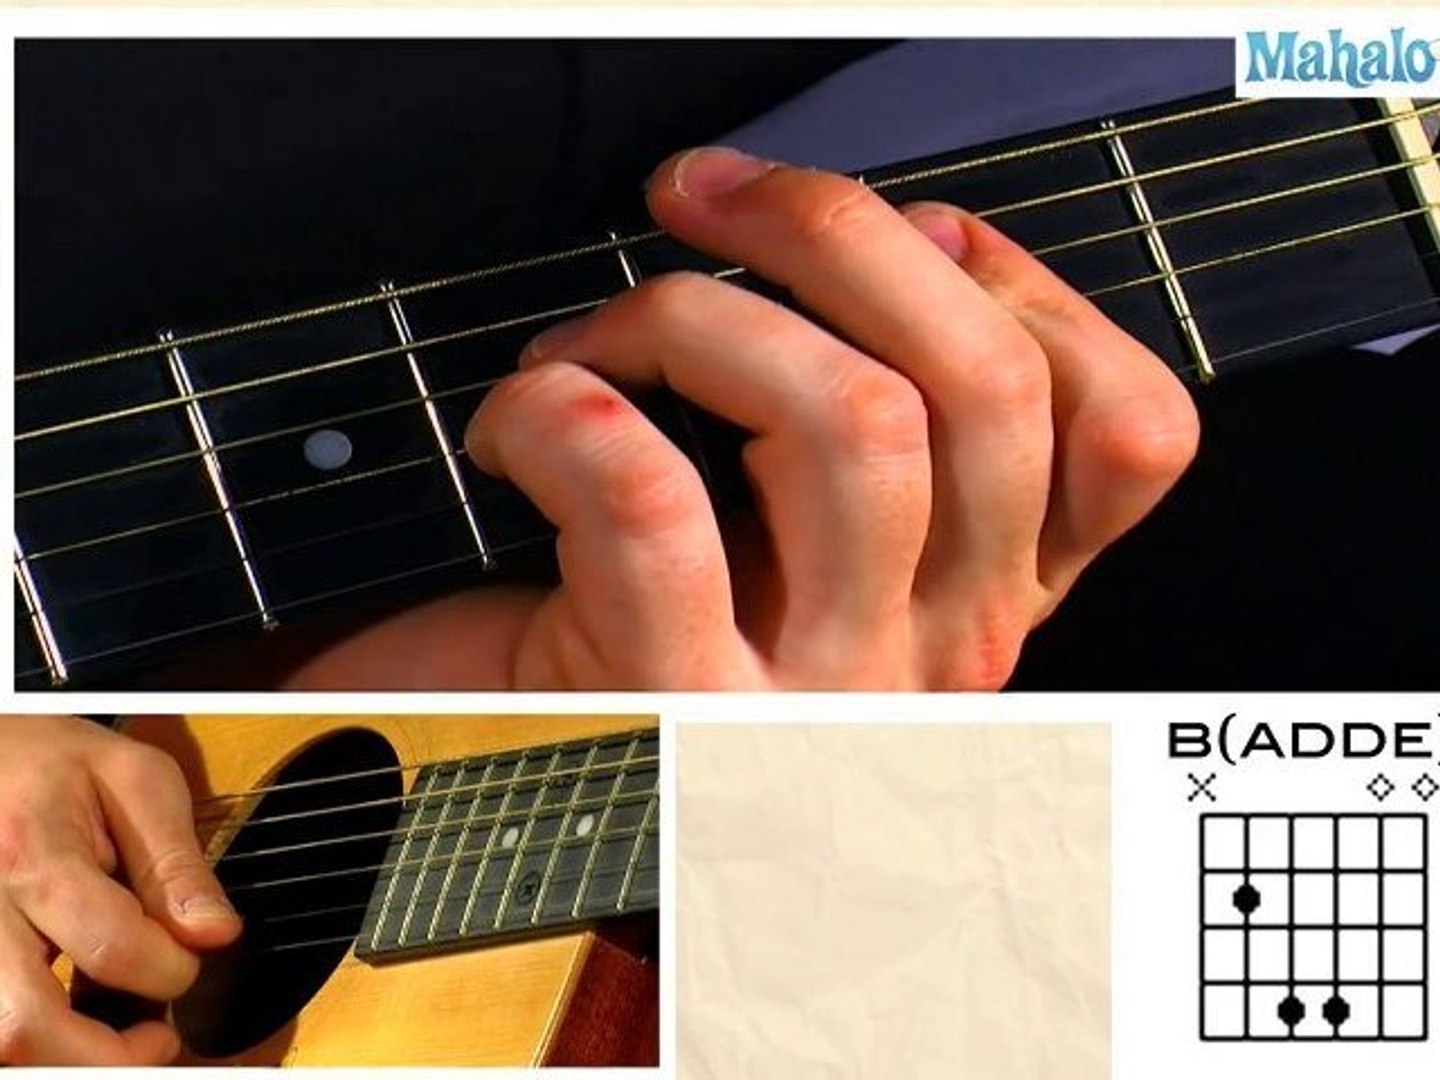 How to Play a B Add E (B (addE)) Chord on Guitar - video Dailymotion